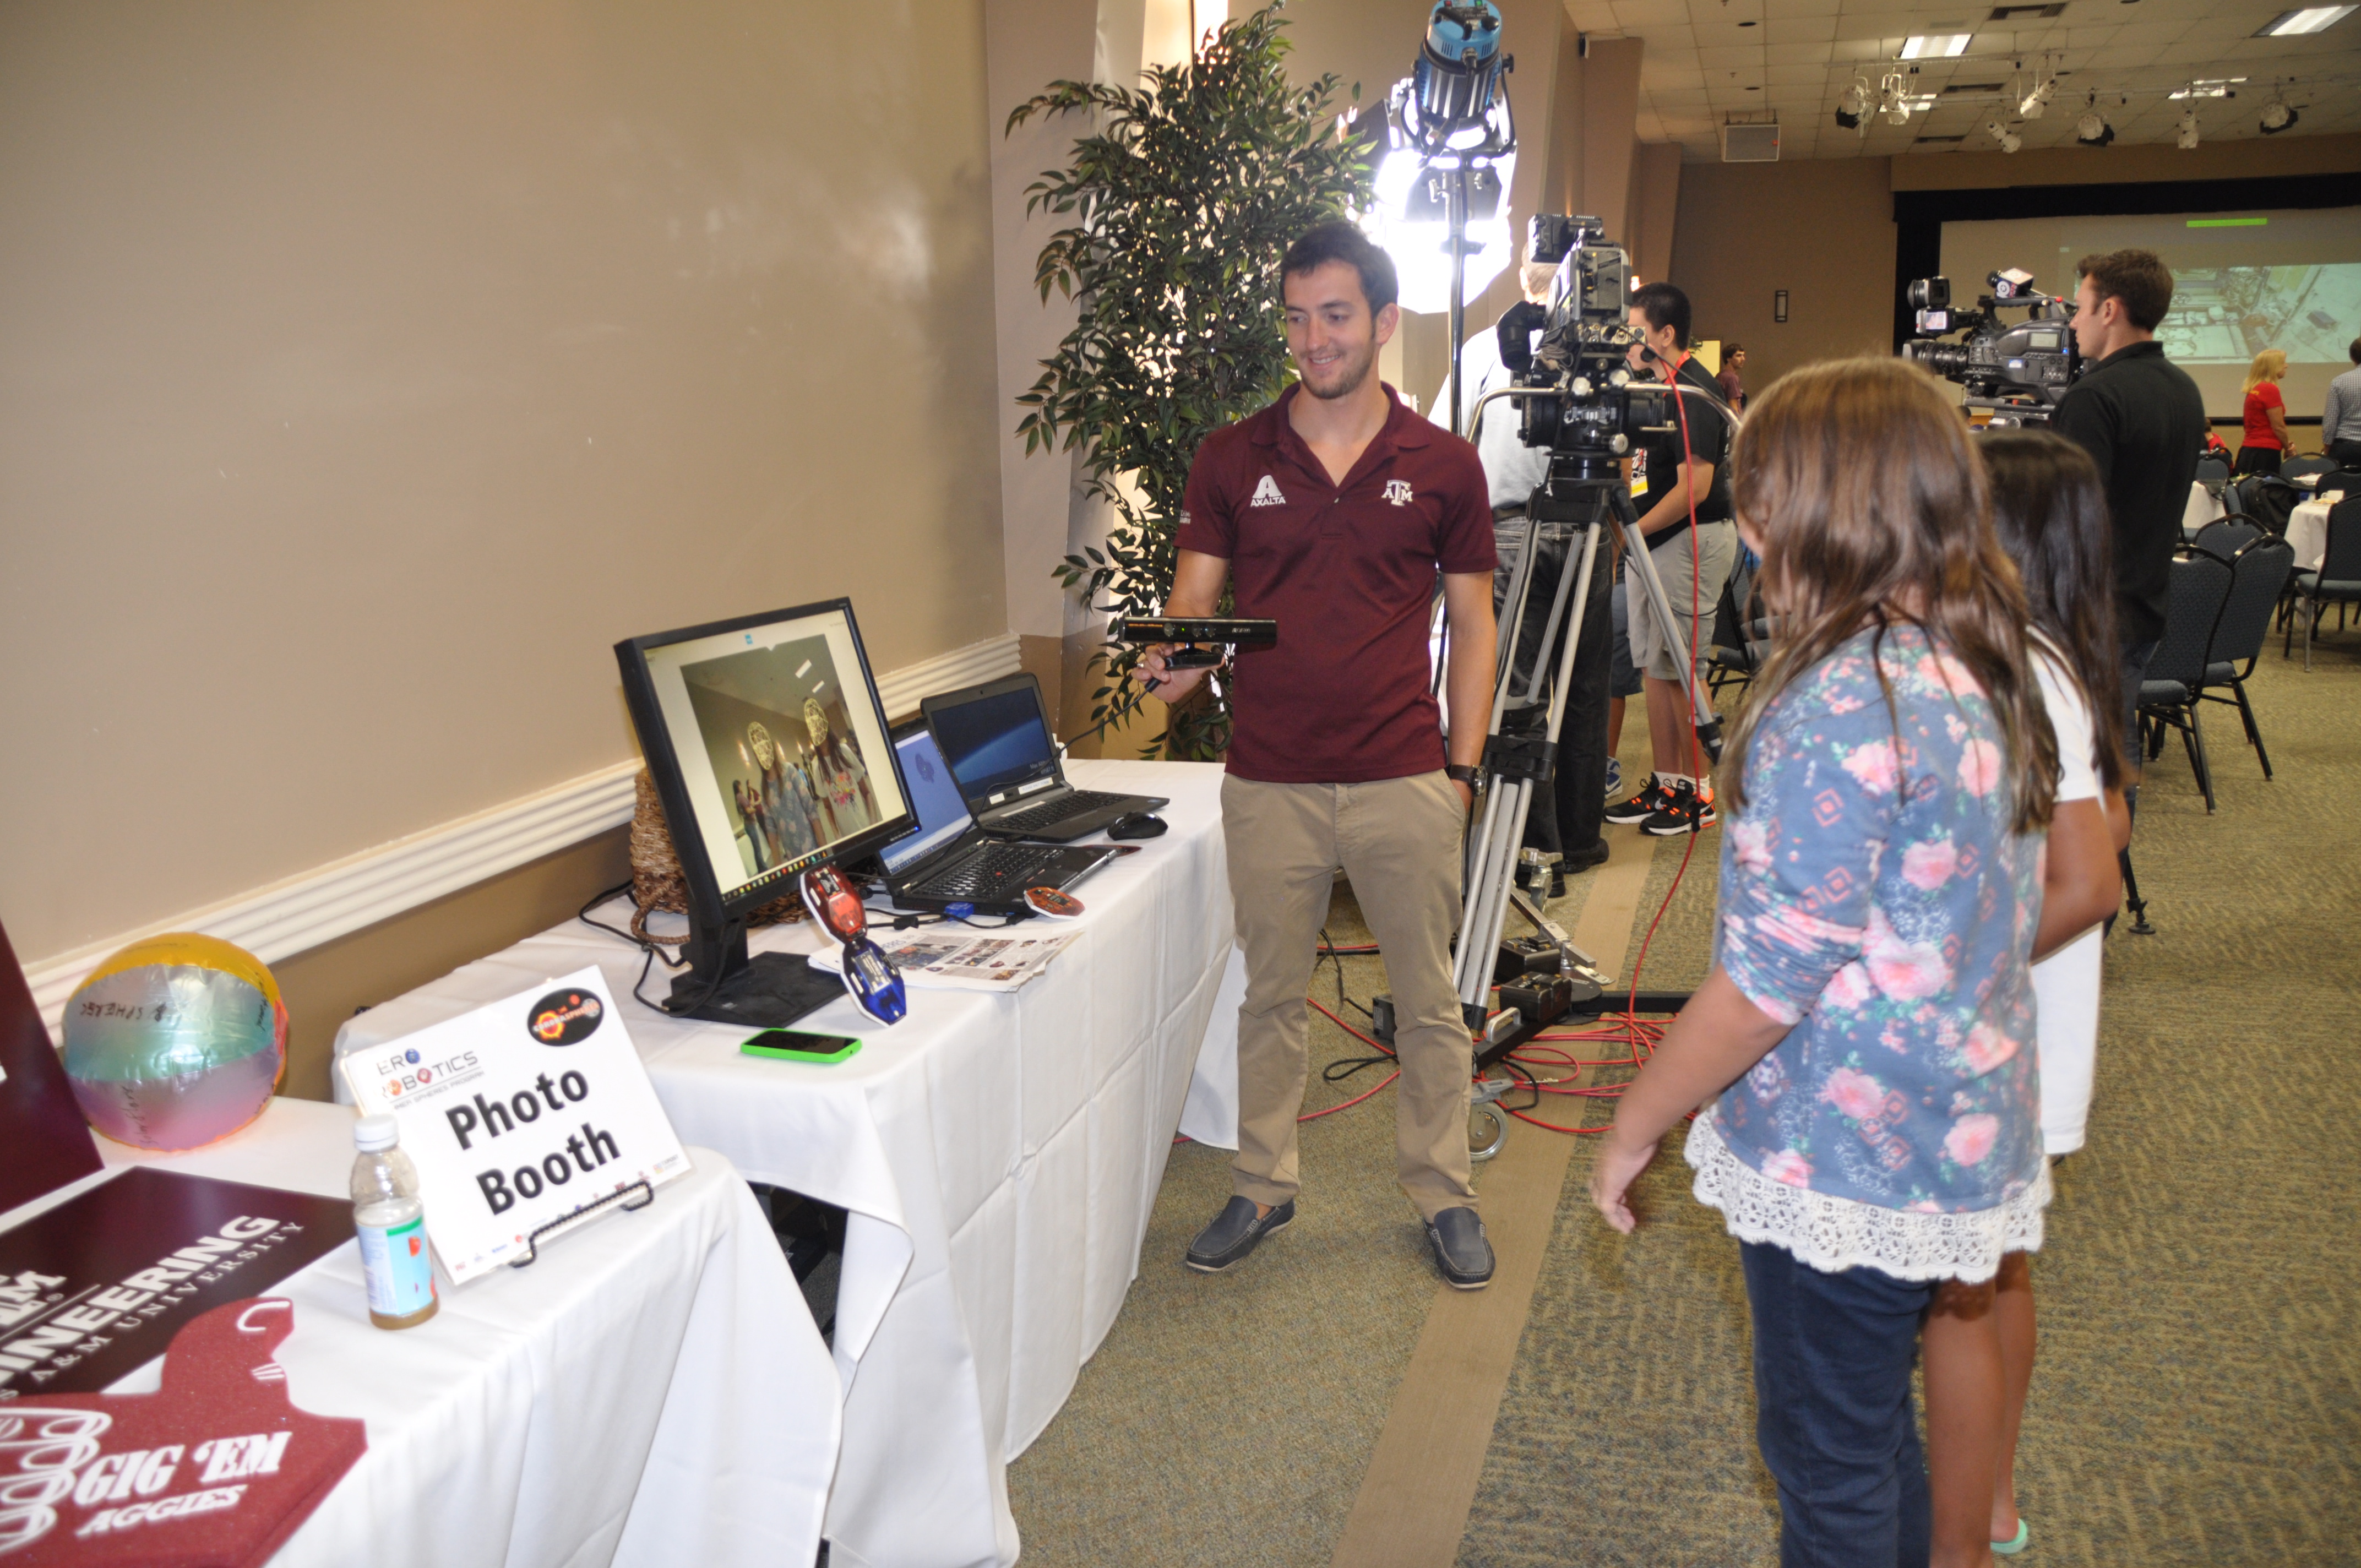 Students learned about SPHERES research being conducted at Texas A&M